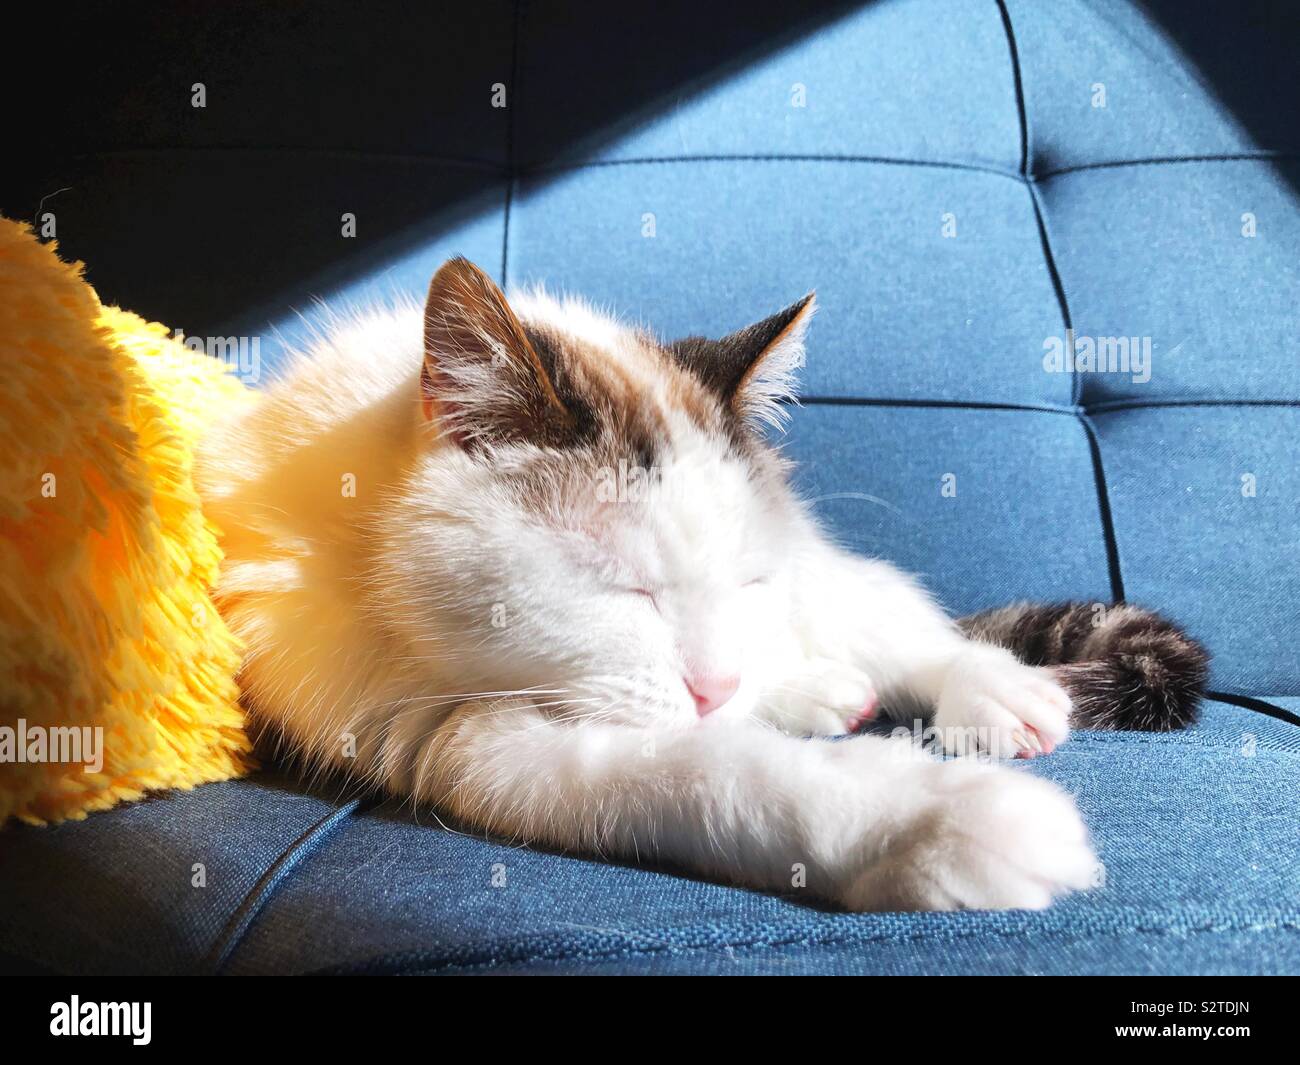 A white cat sleeping in a sunny spot on a blue sofa. Stock Photo